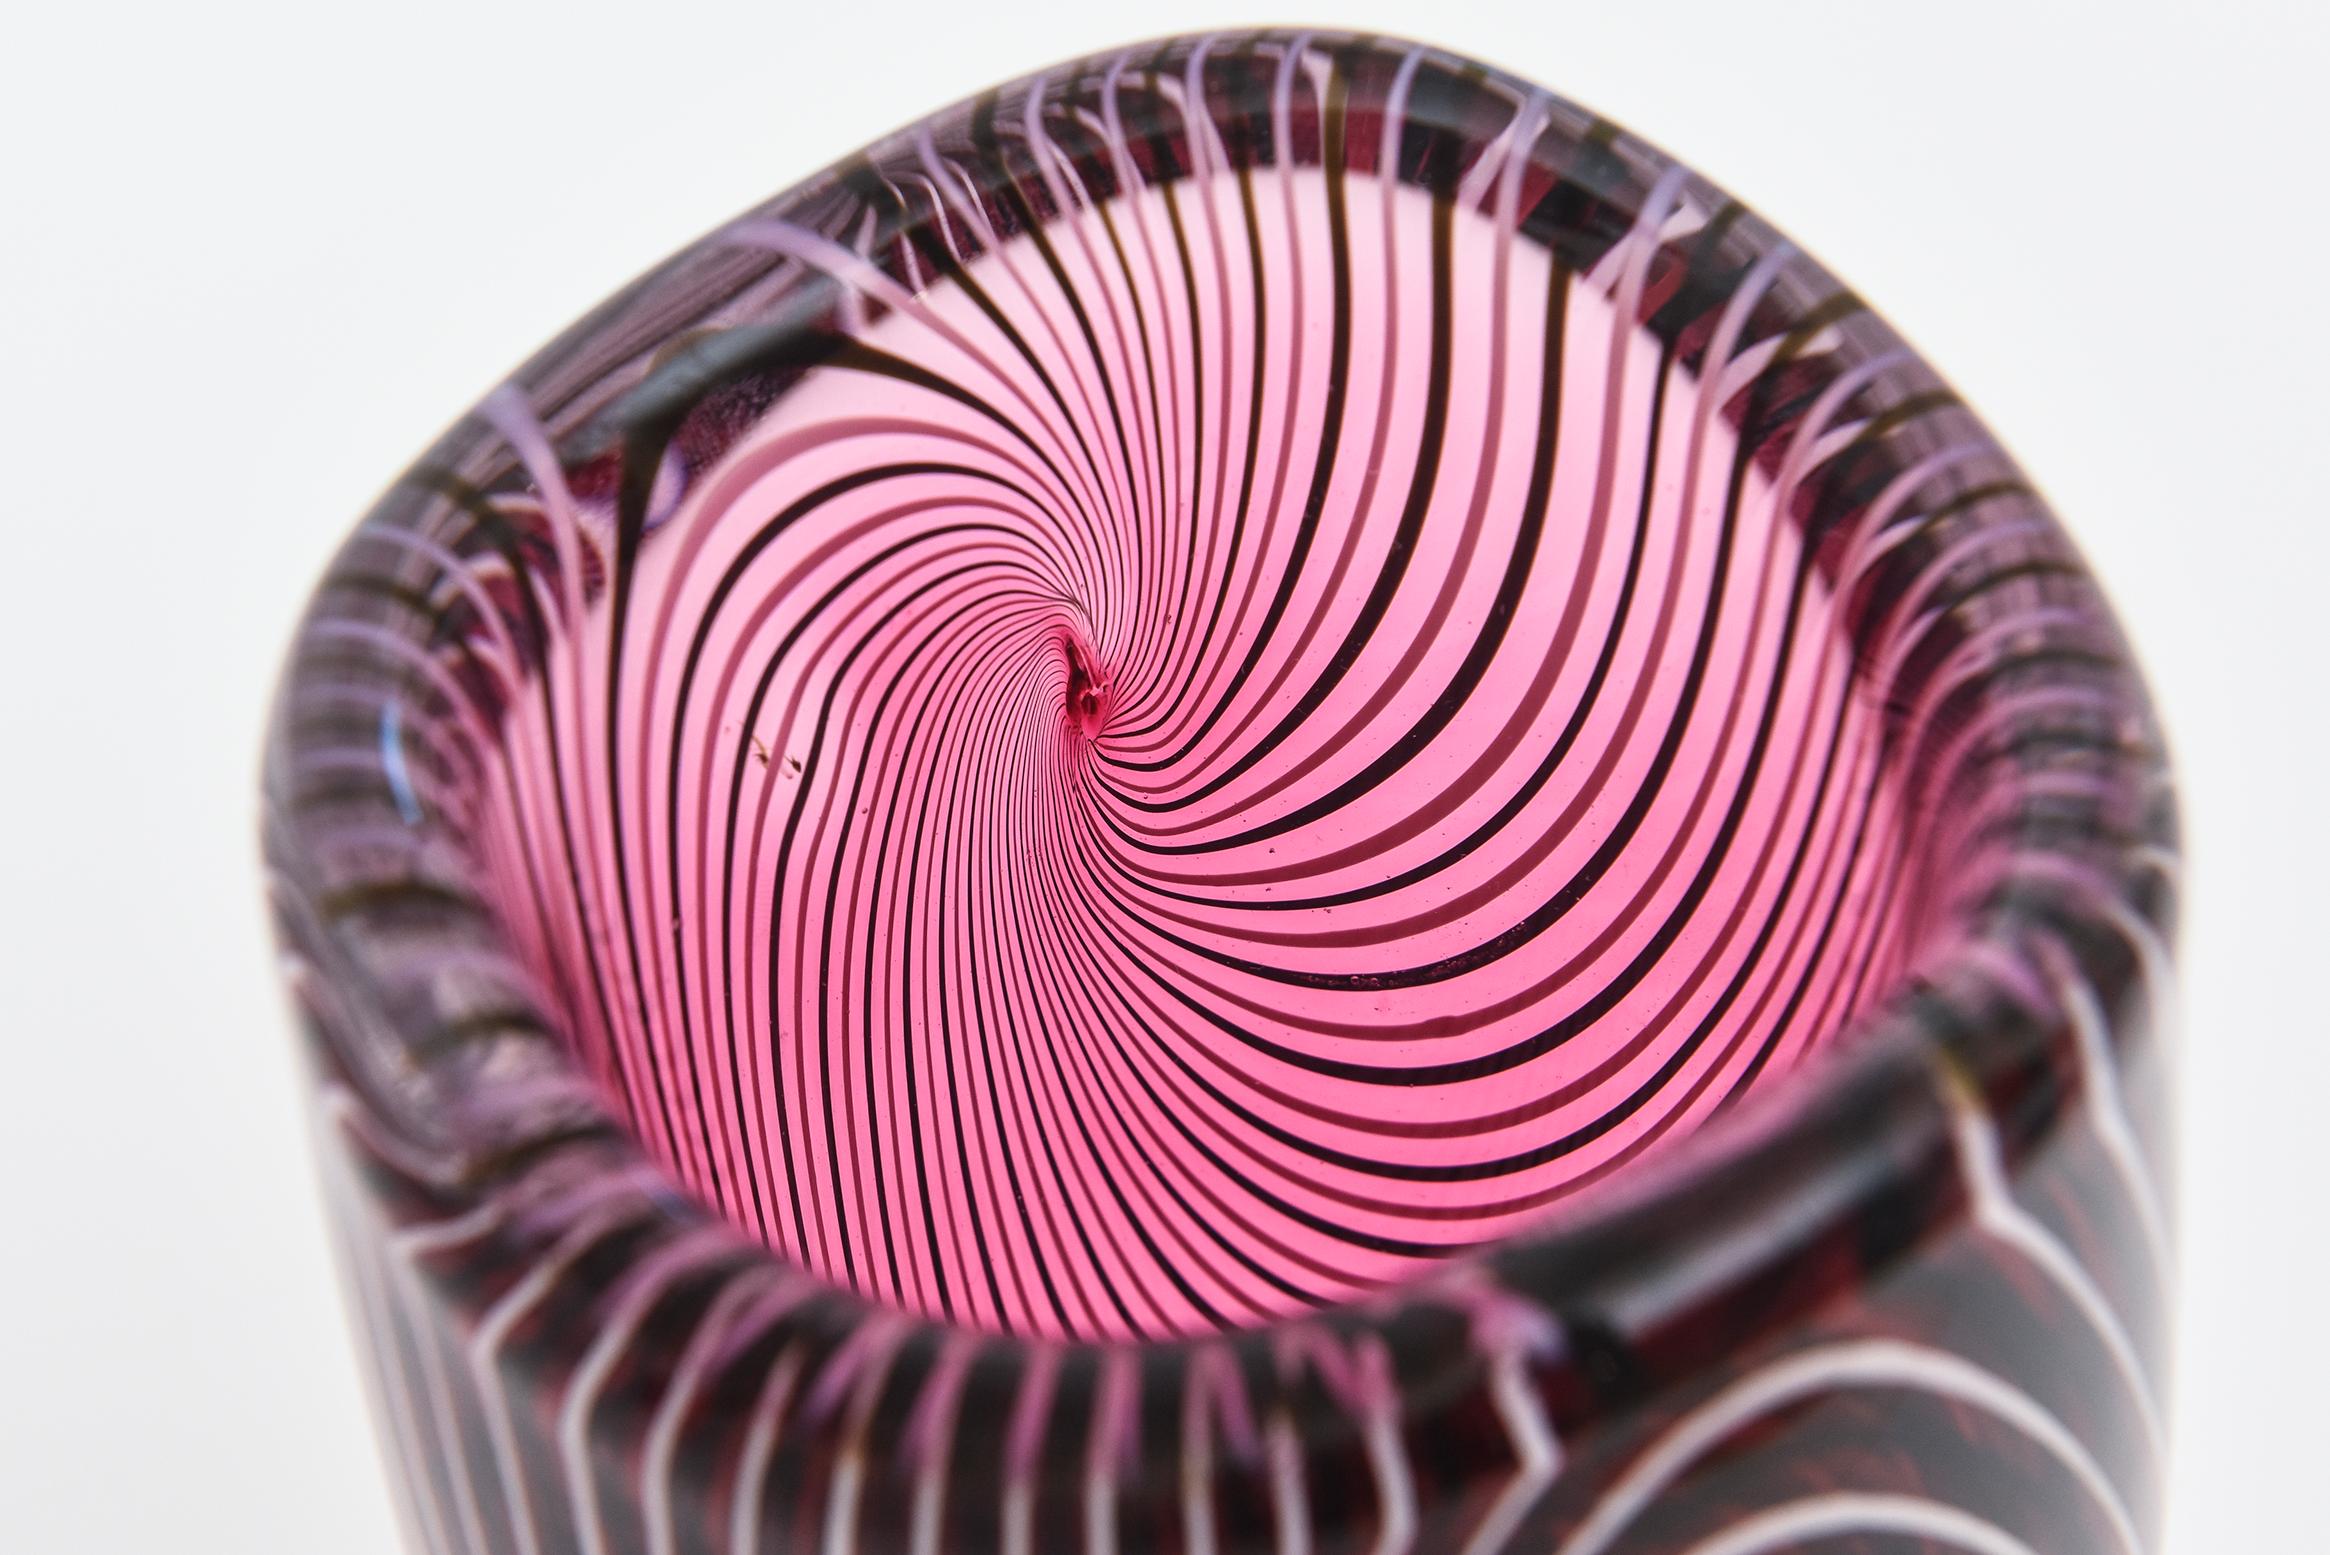 Mid-Century Modern Vintage Murano Seguso Spiral Optic Striped Deep Pink And White Vase or Vessel For Sale